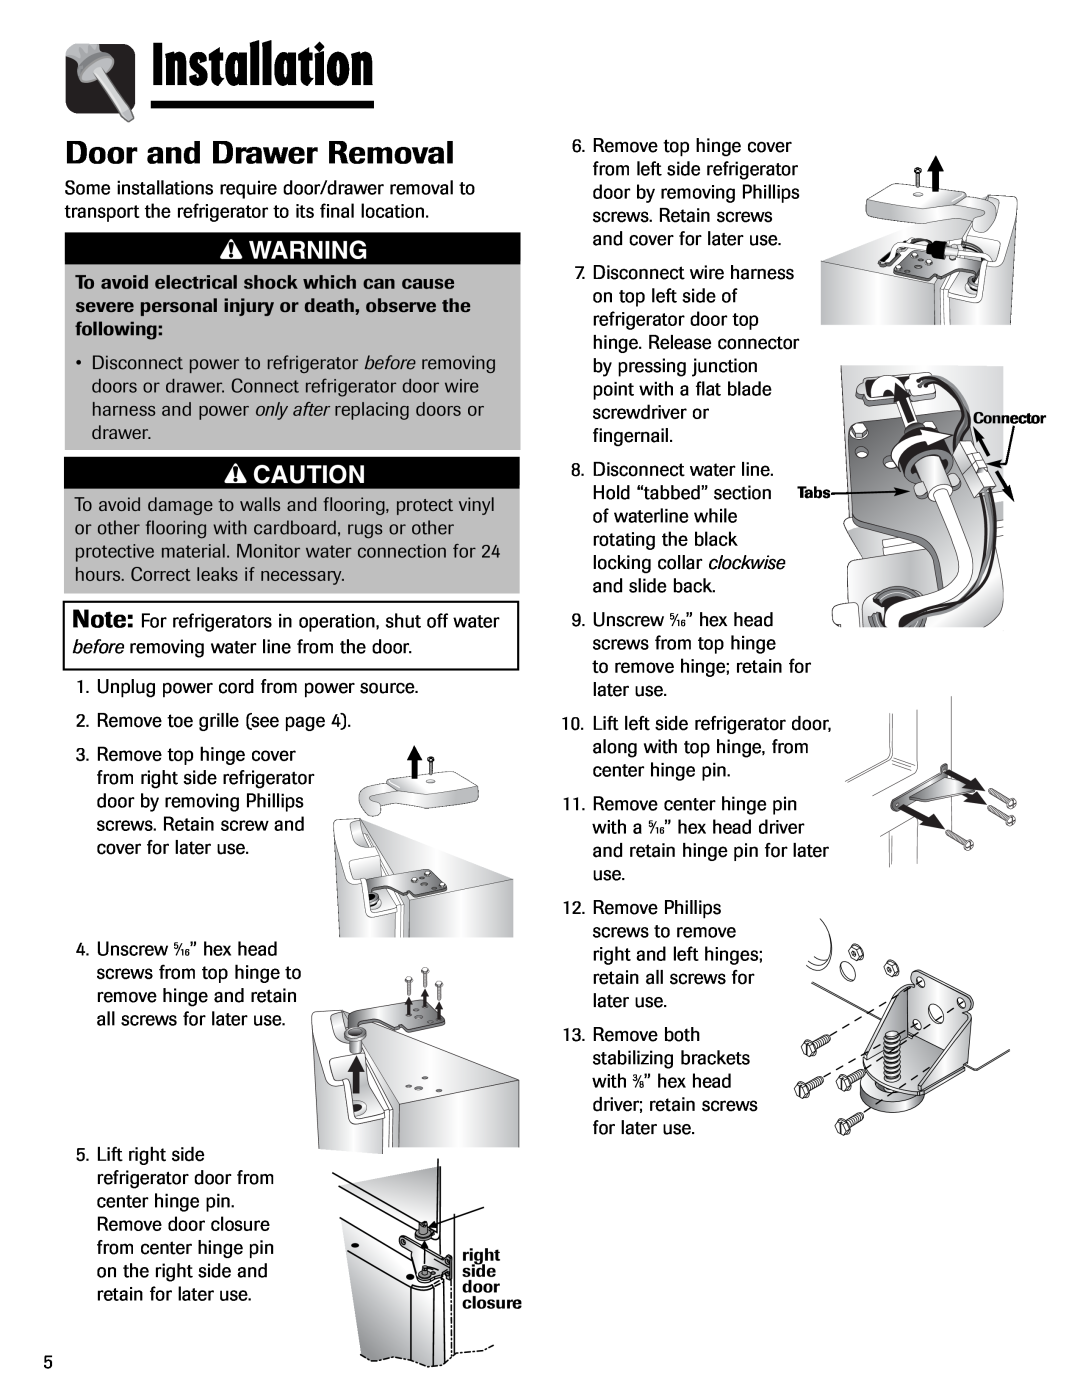 Amana AFI2538AEW important safety instructions Door and Drawer Removal, Installation 